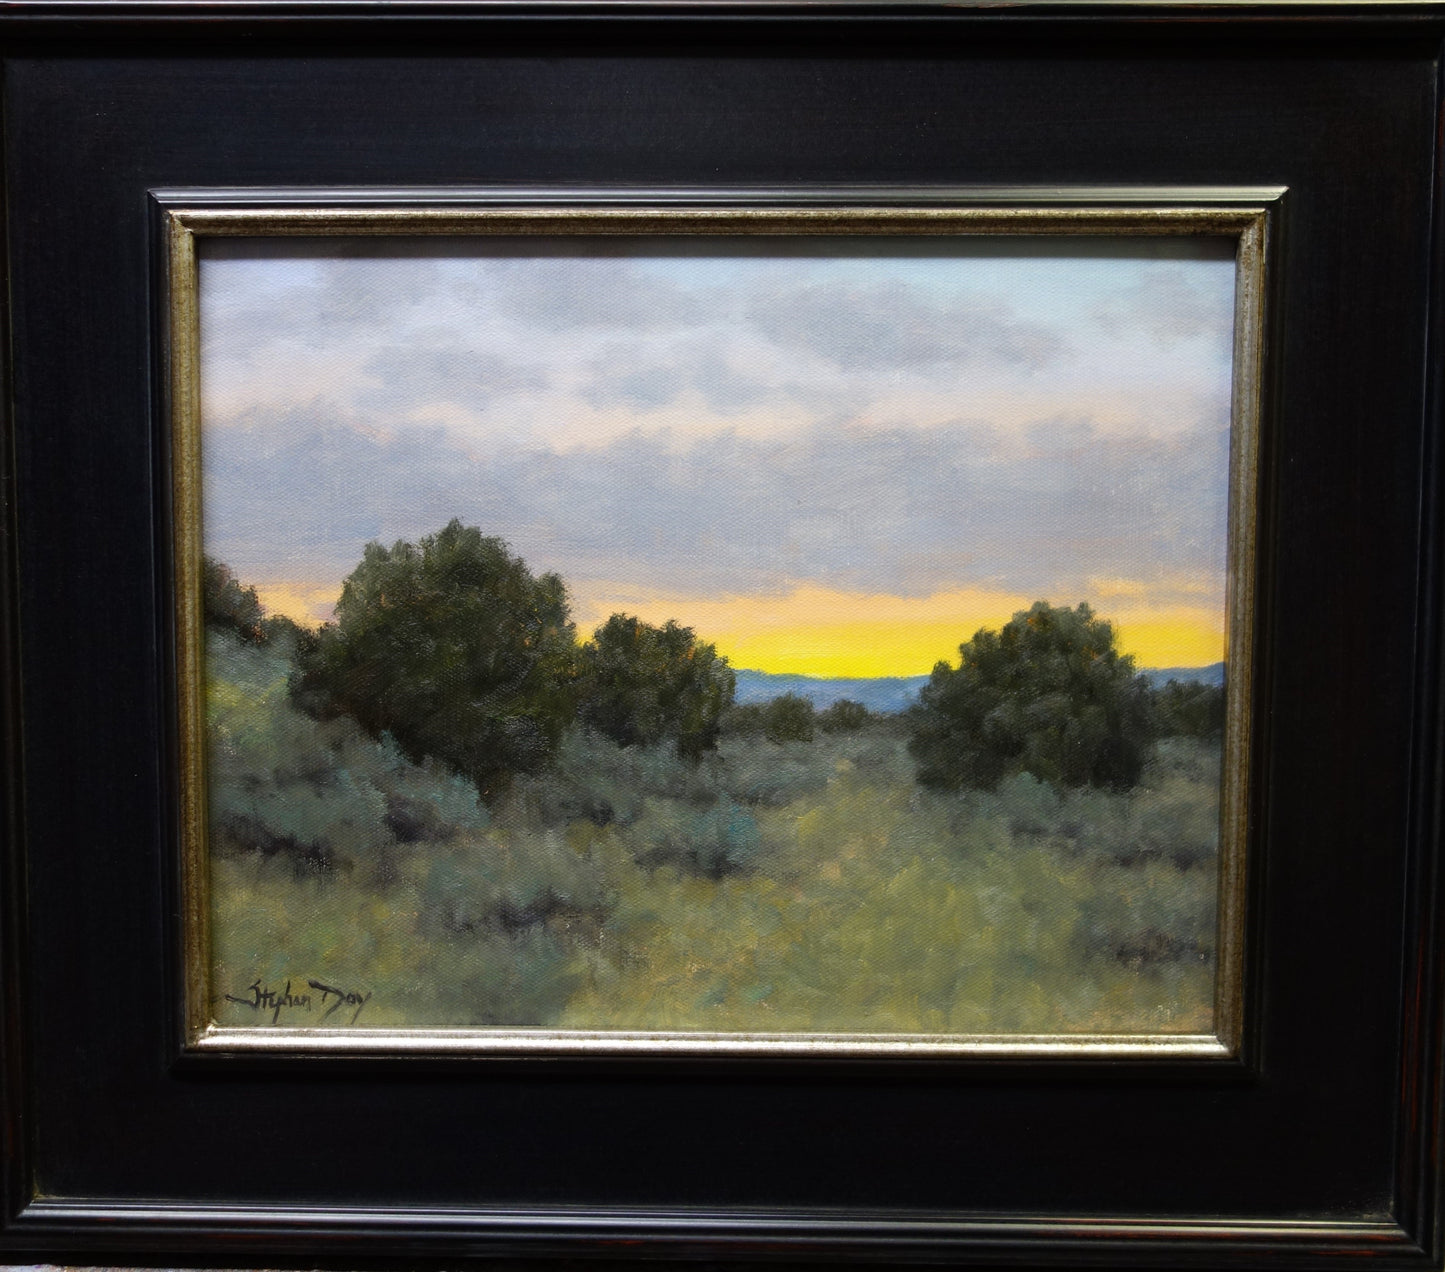 At a Stop Along the Road-Painting-Stephen Day-Sorrel Sky Gallery